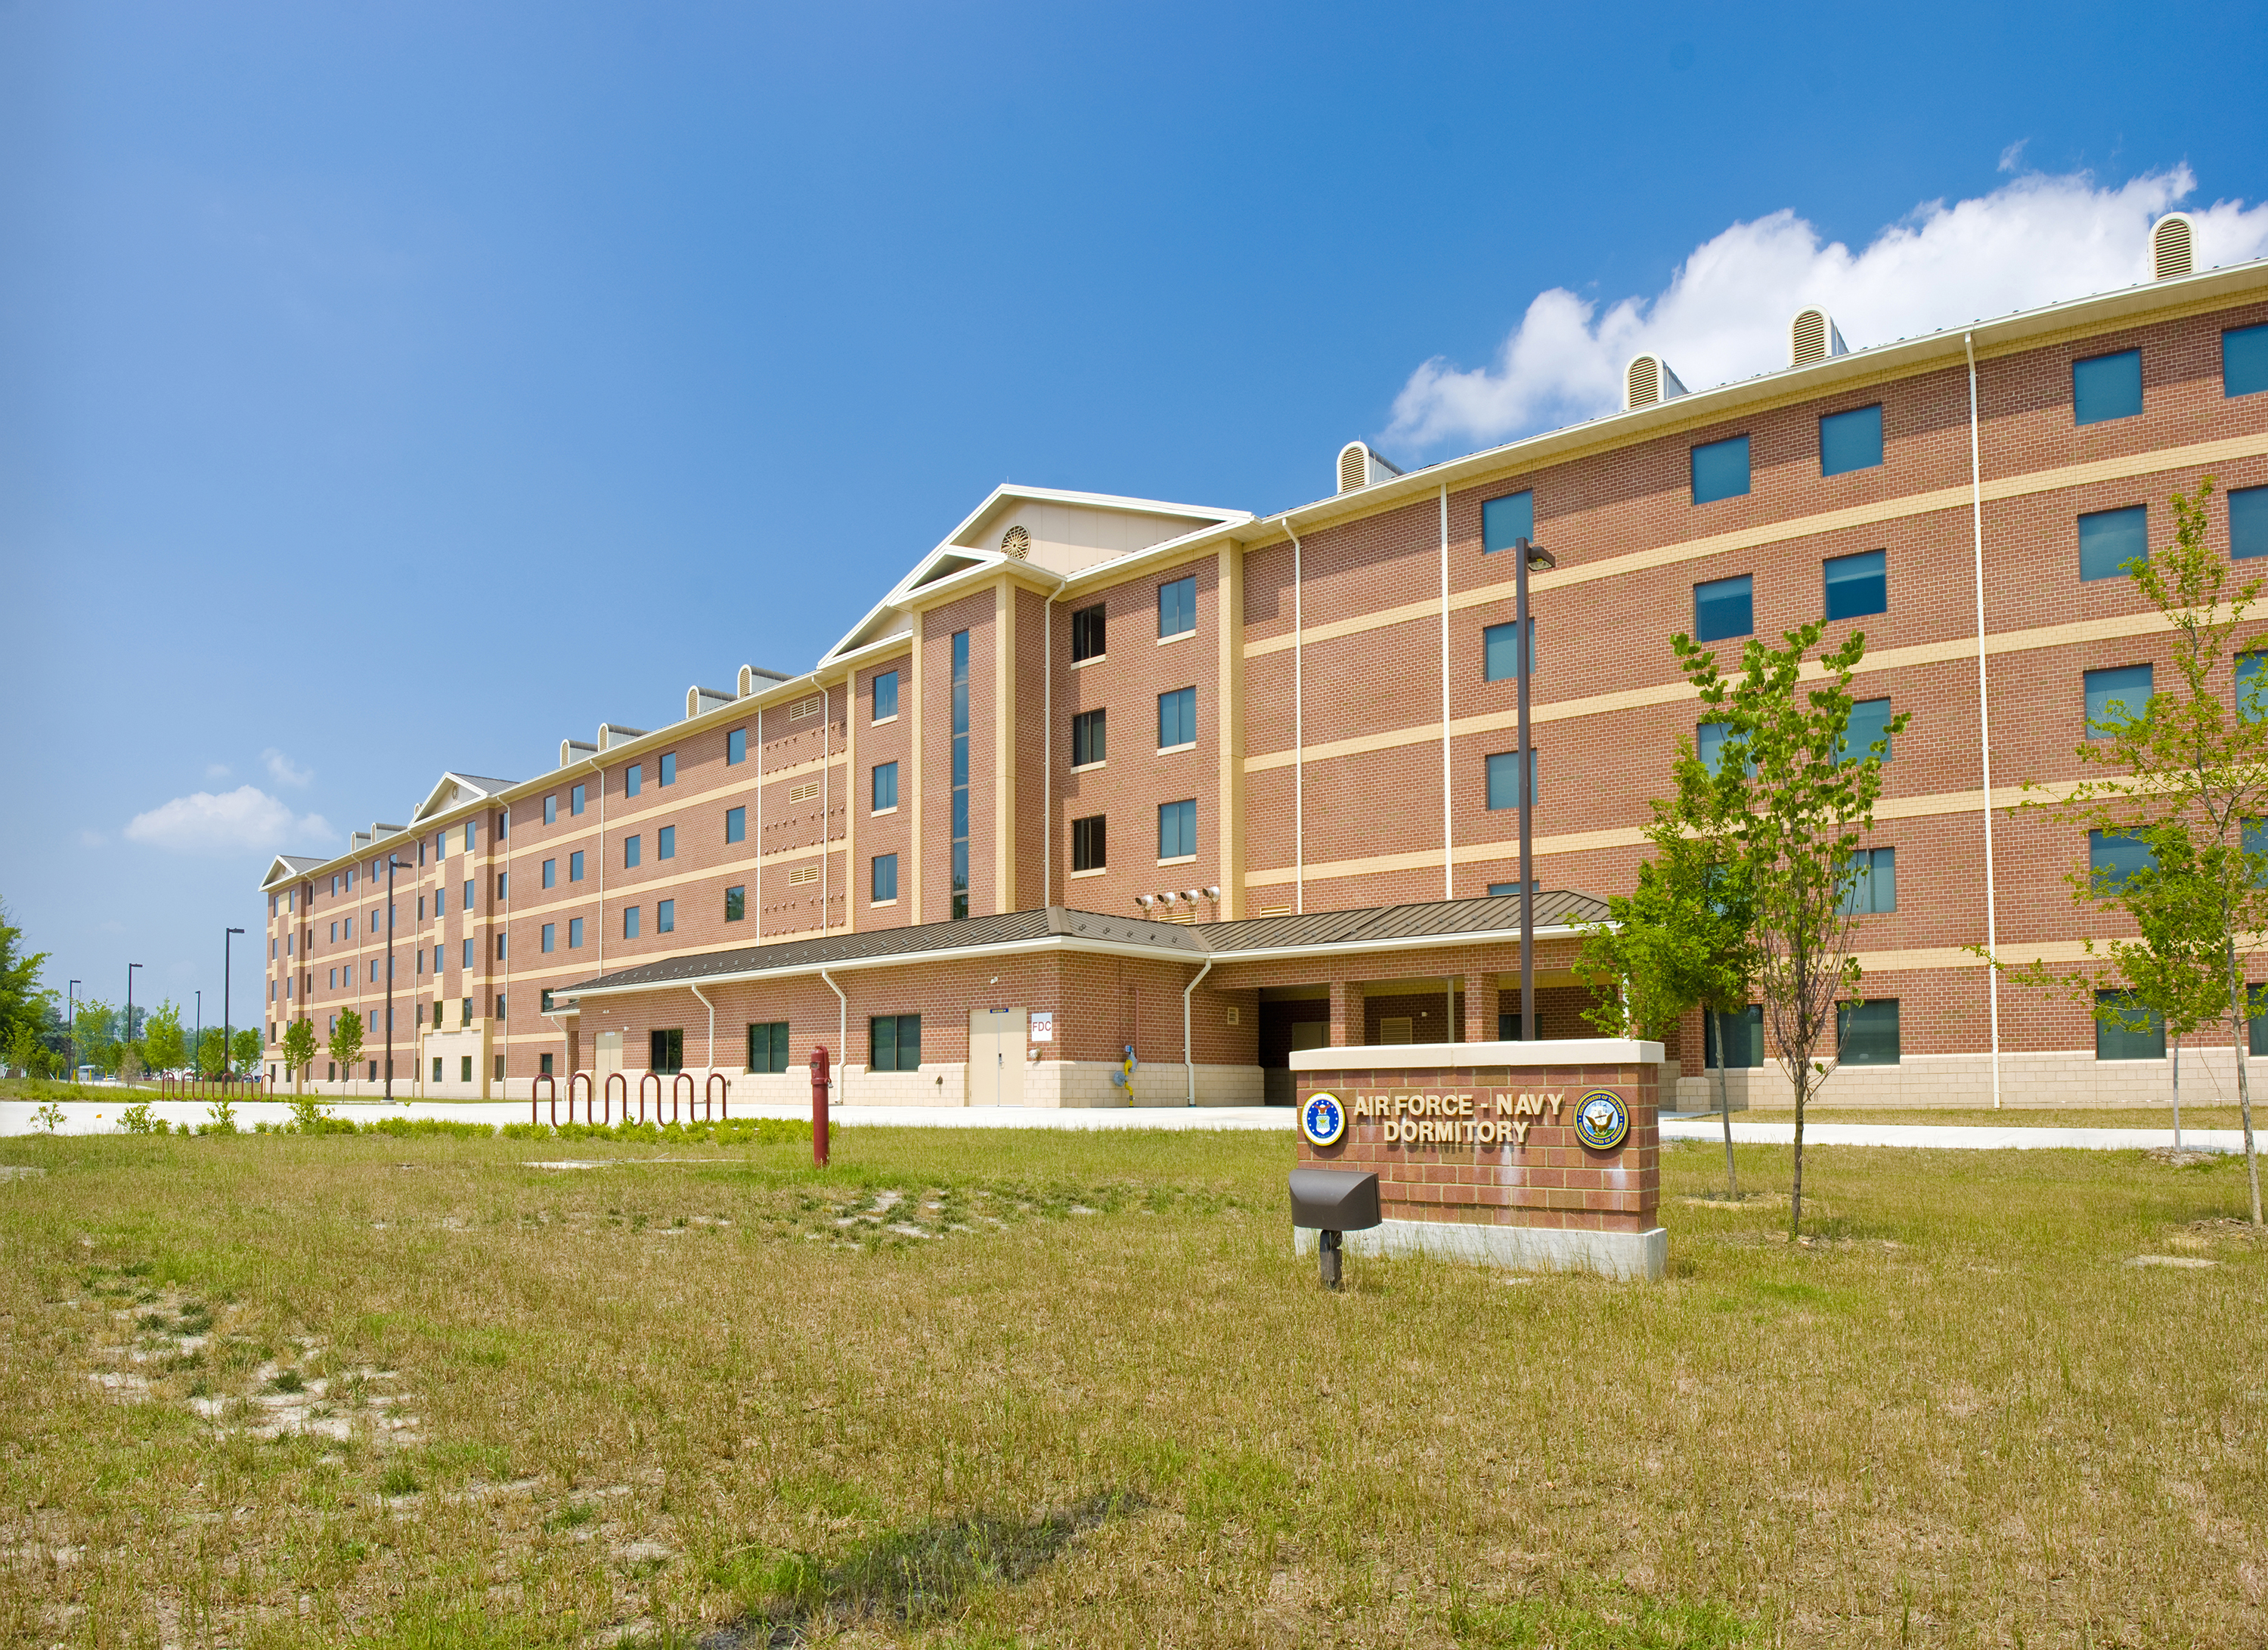 Air Force/Navy Dormitory - Wiley|Wilson